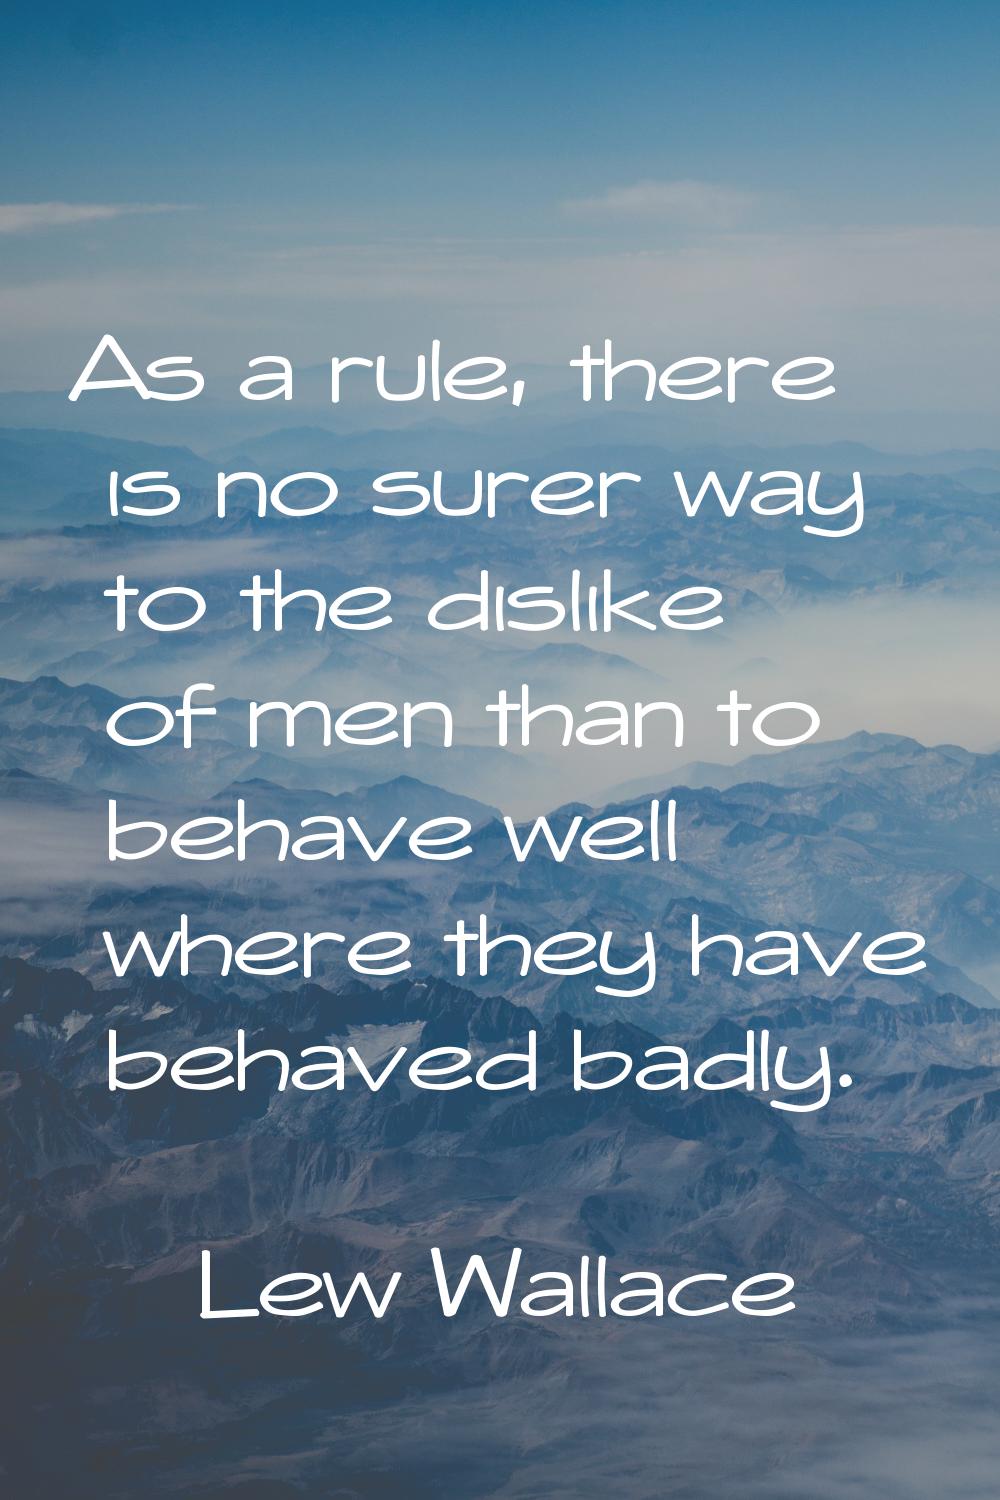 As a rule, there is no surer way to the dislike of men than to behave well where they have behaved 